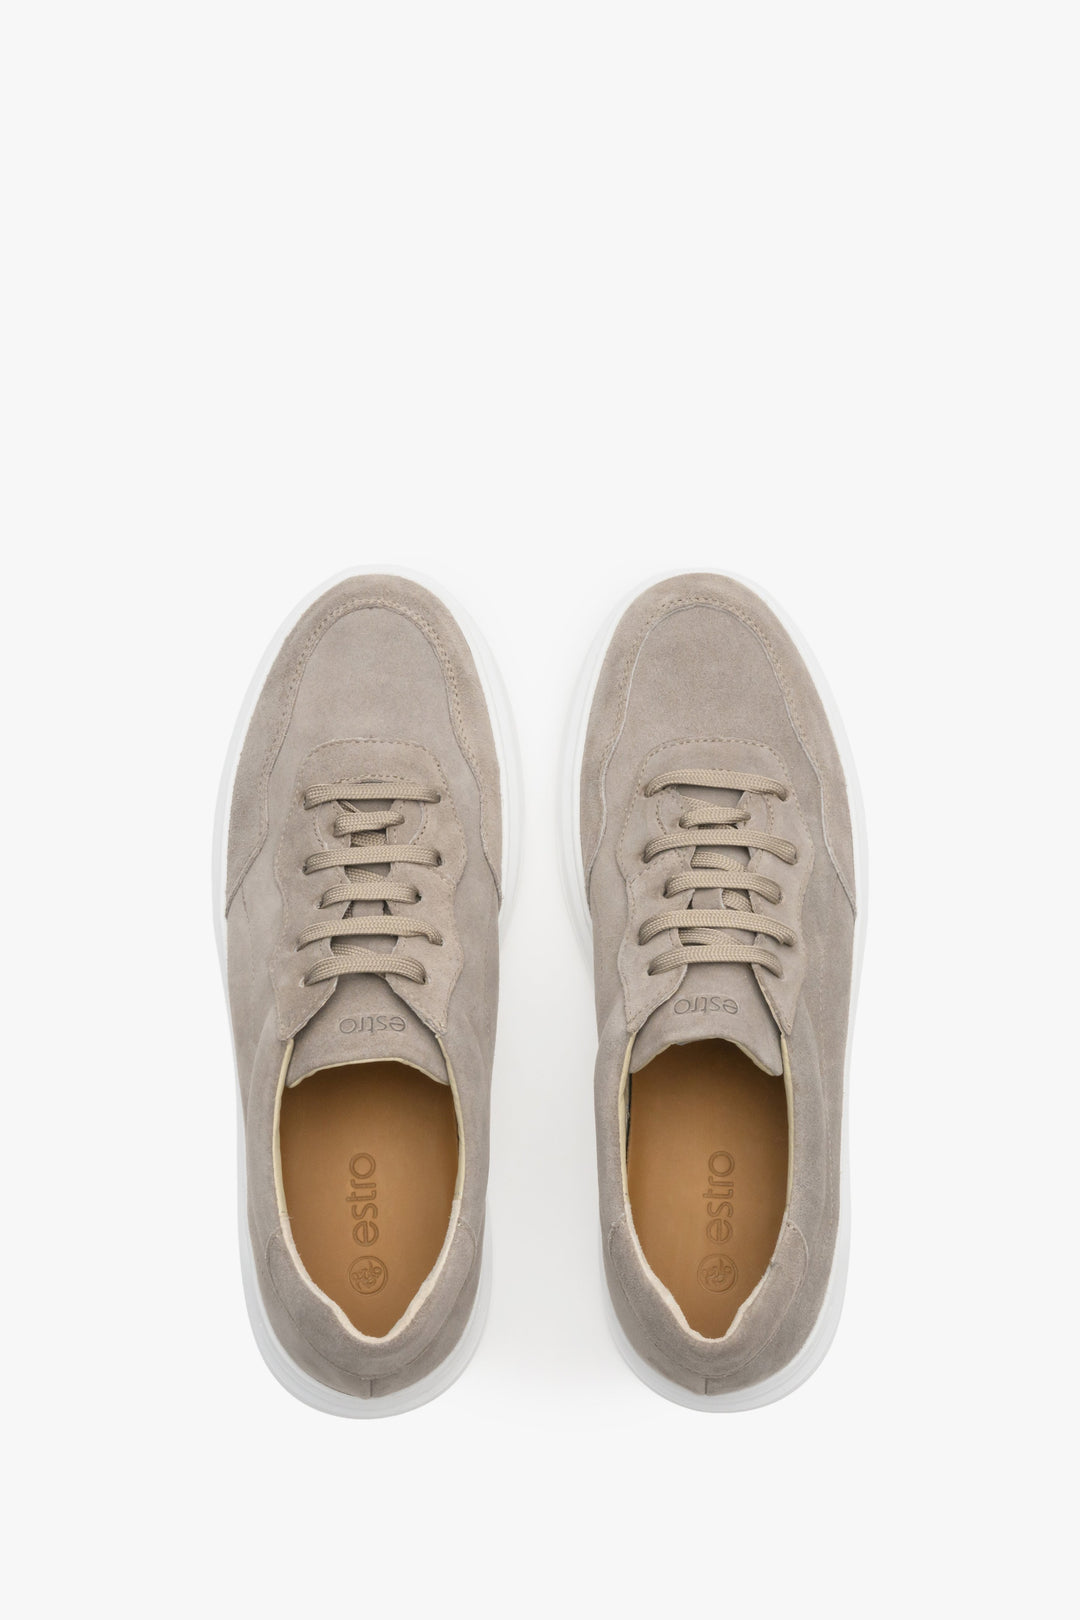 Grey velour Estro men's sneakers in with lacing for spring - presentation of the model from above.